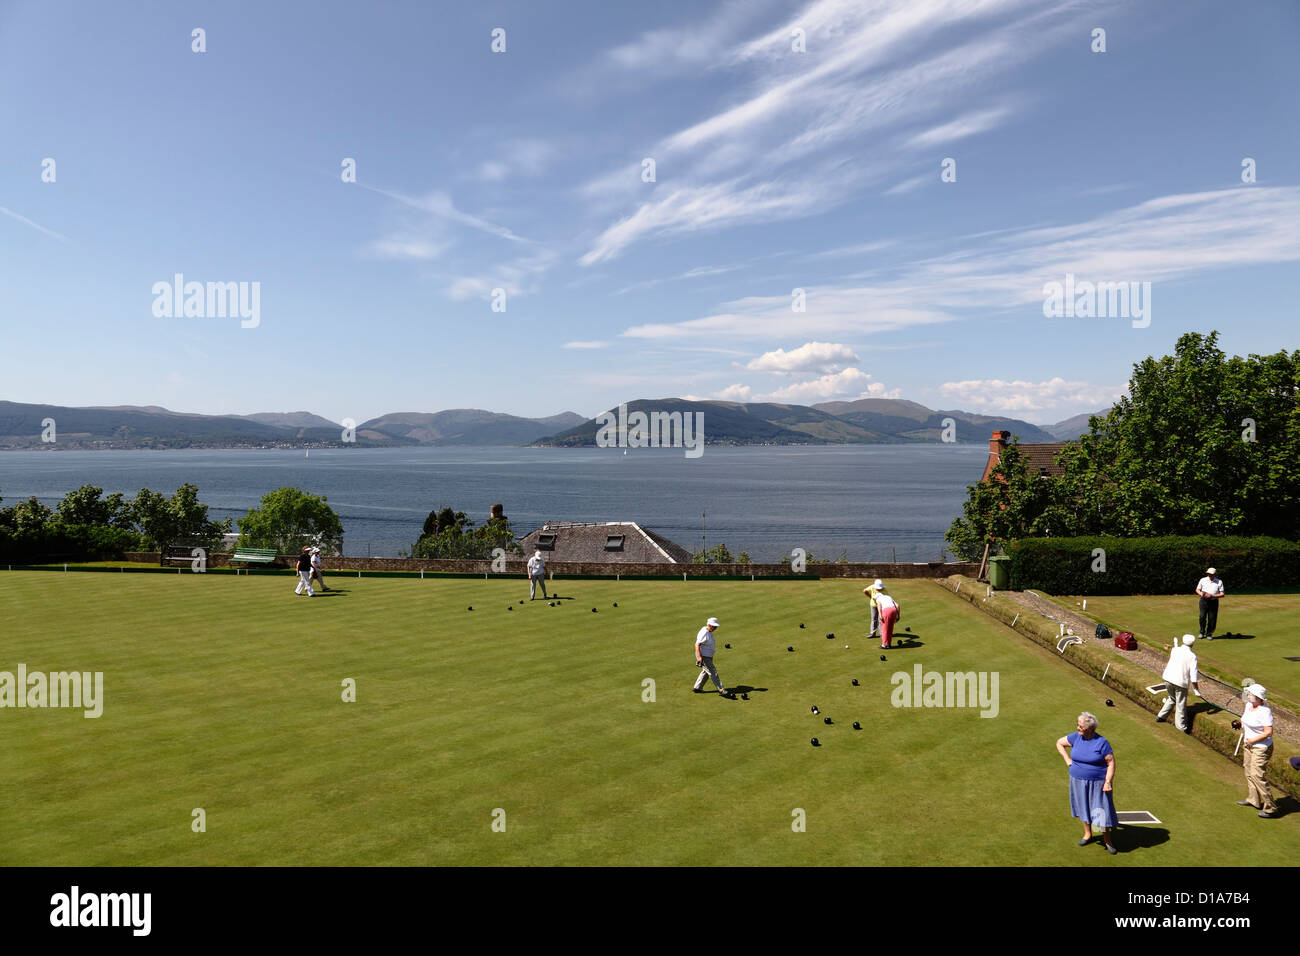 A game of lawn bowls being played at The Gourock Bowling Club beside the Firth of Clyde in Inverclyde, Scotland, UK Stock Photo